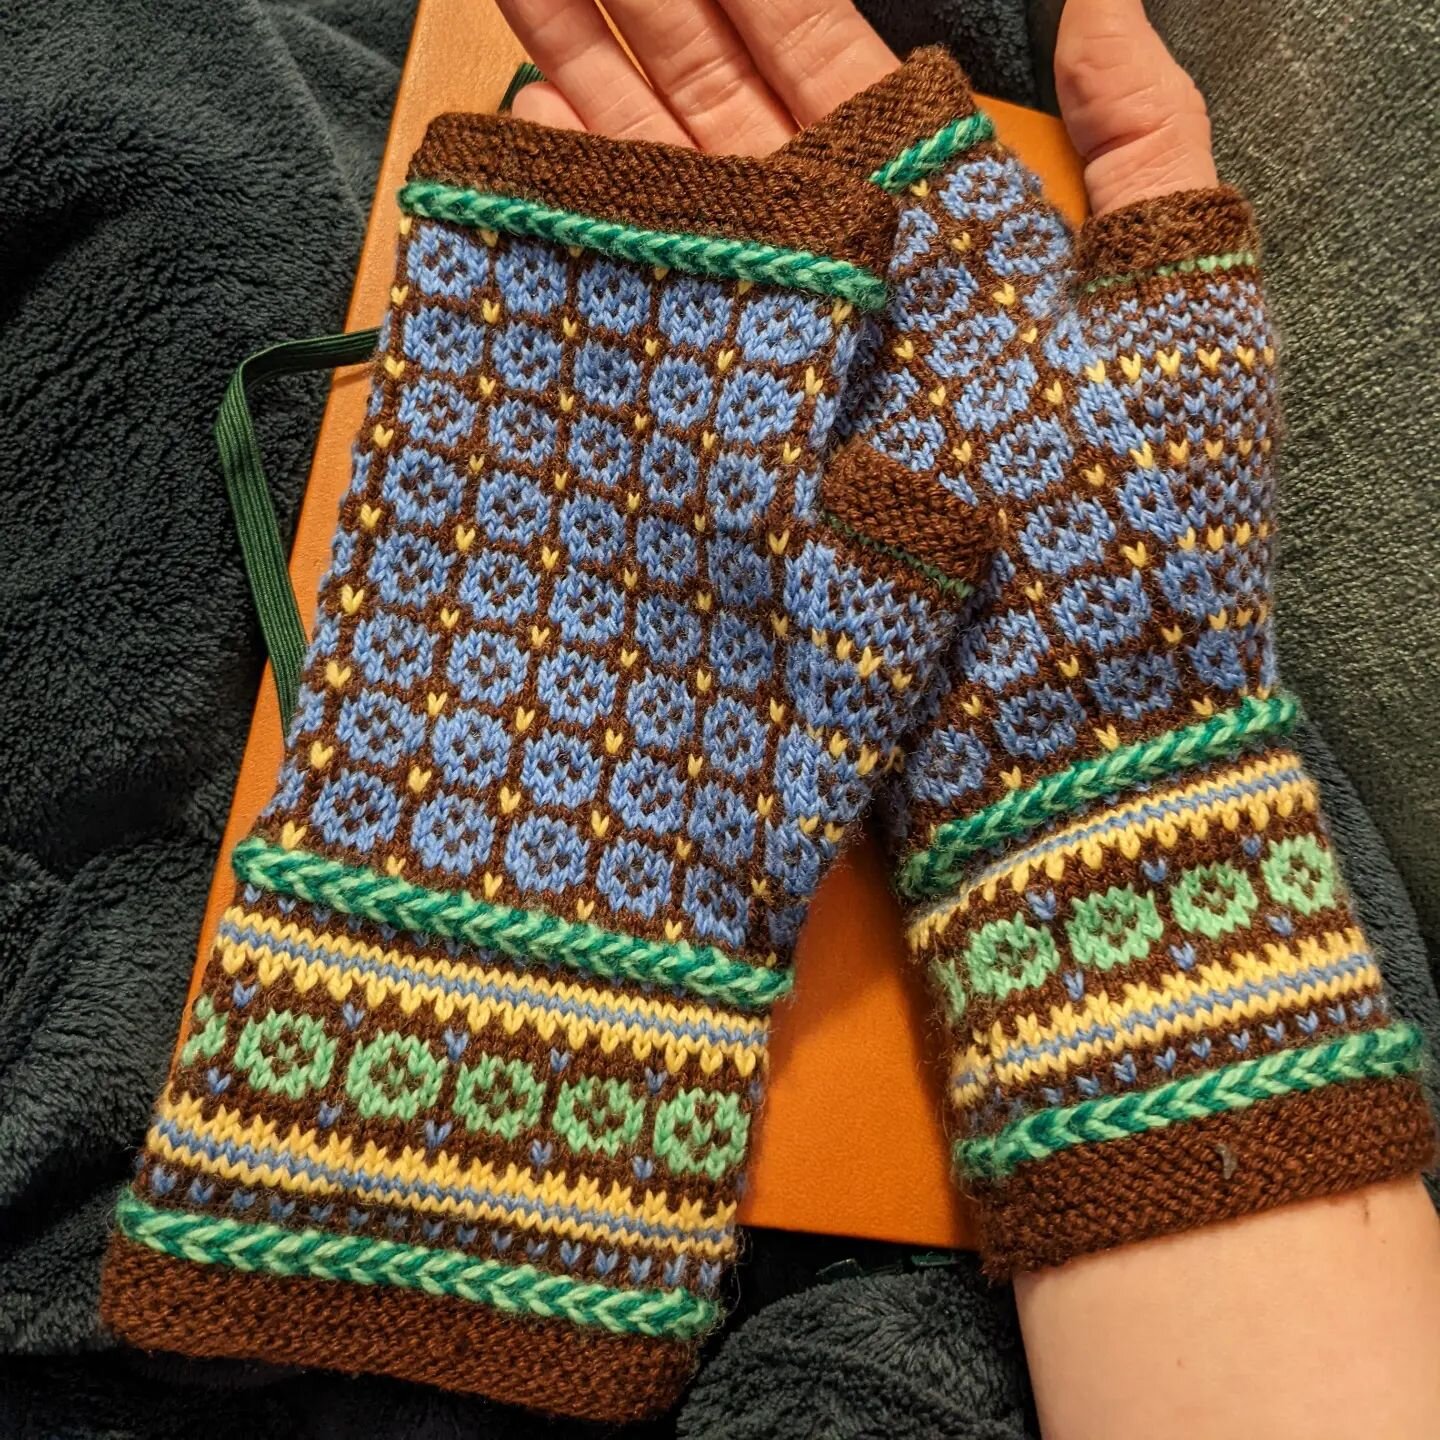 My choir buddy and amazingly talented friend @zannafredland knitted these gorgeous, perfectly fitting fingerless Latvian patterned mittens for me!! (Yes, those are basically all of my favorite colors and yes, they were a complete surprise gift and st